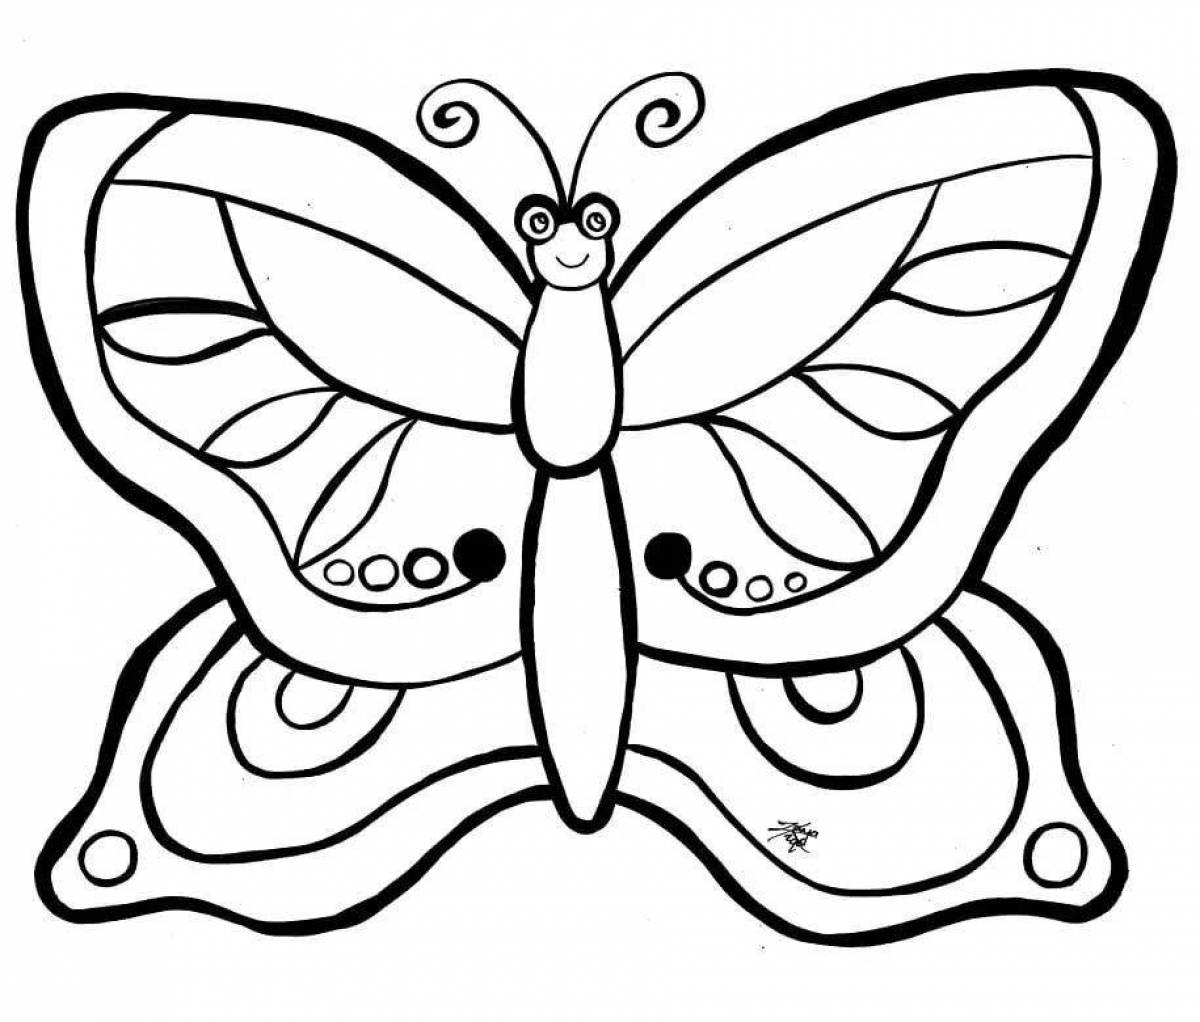 Transcendent butterfly coloring pages